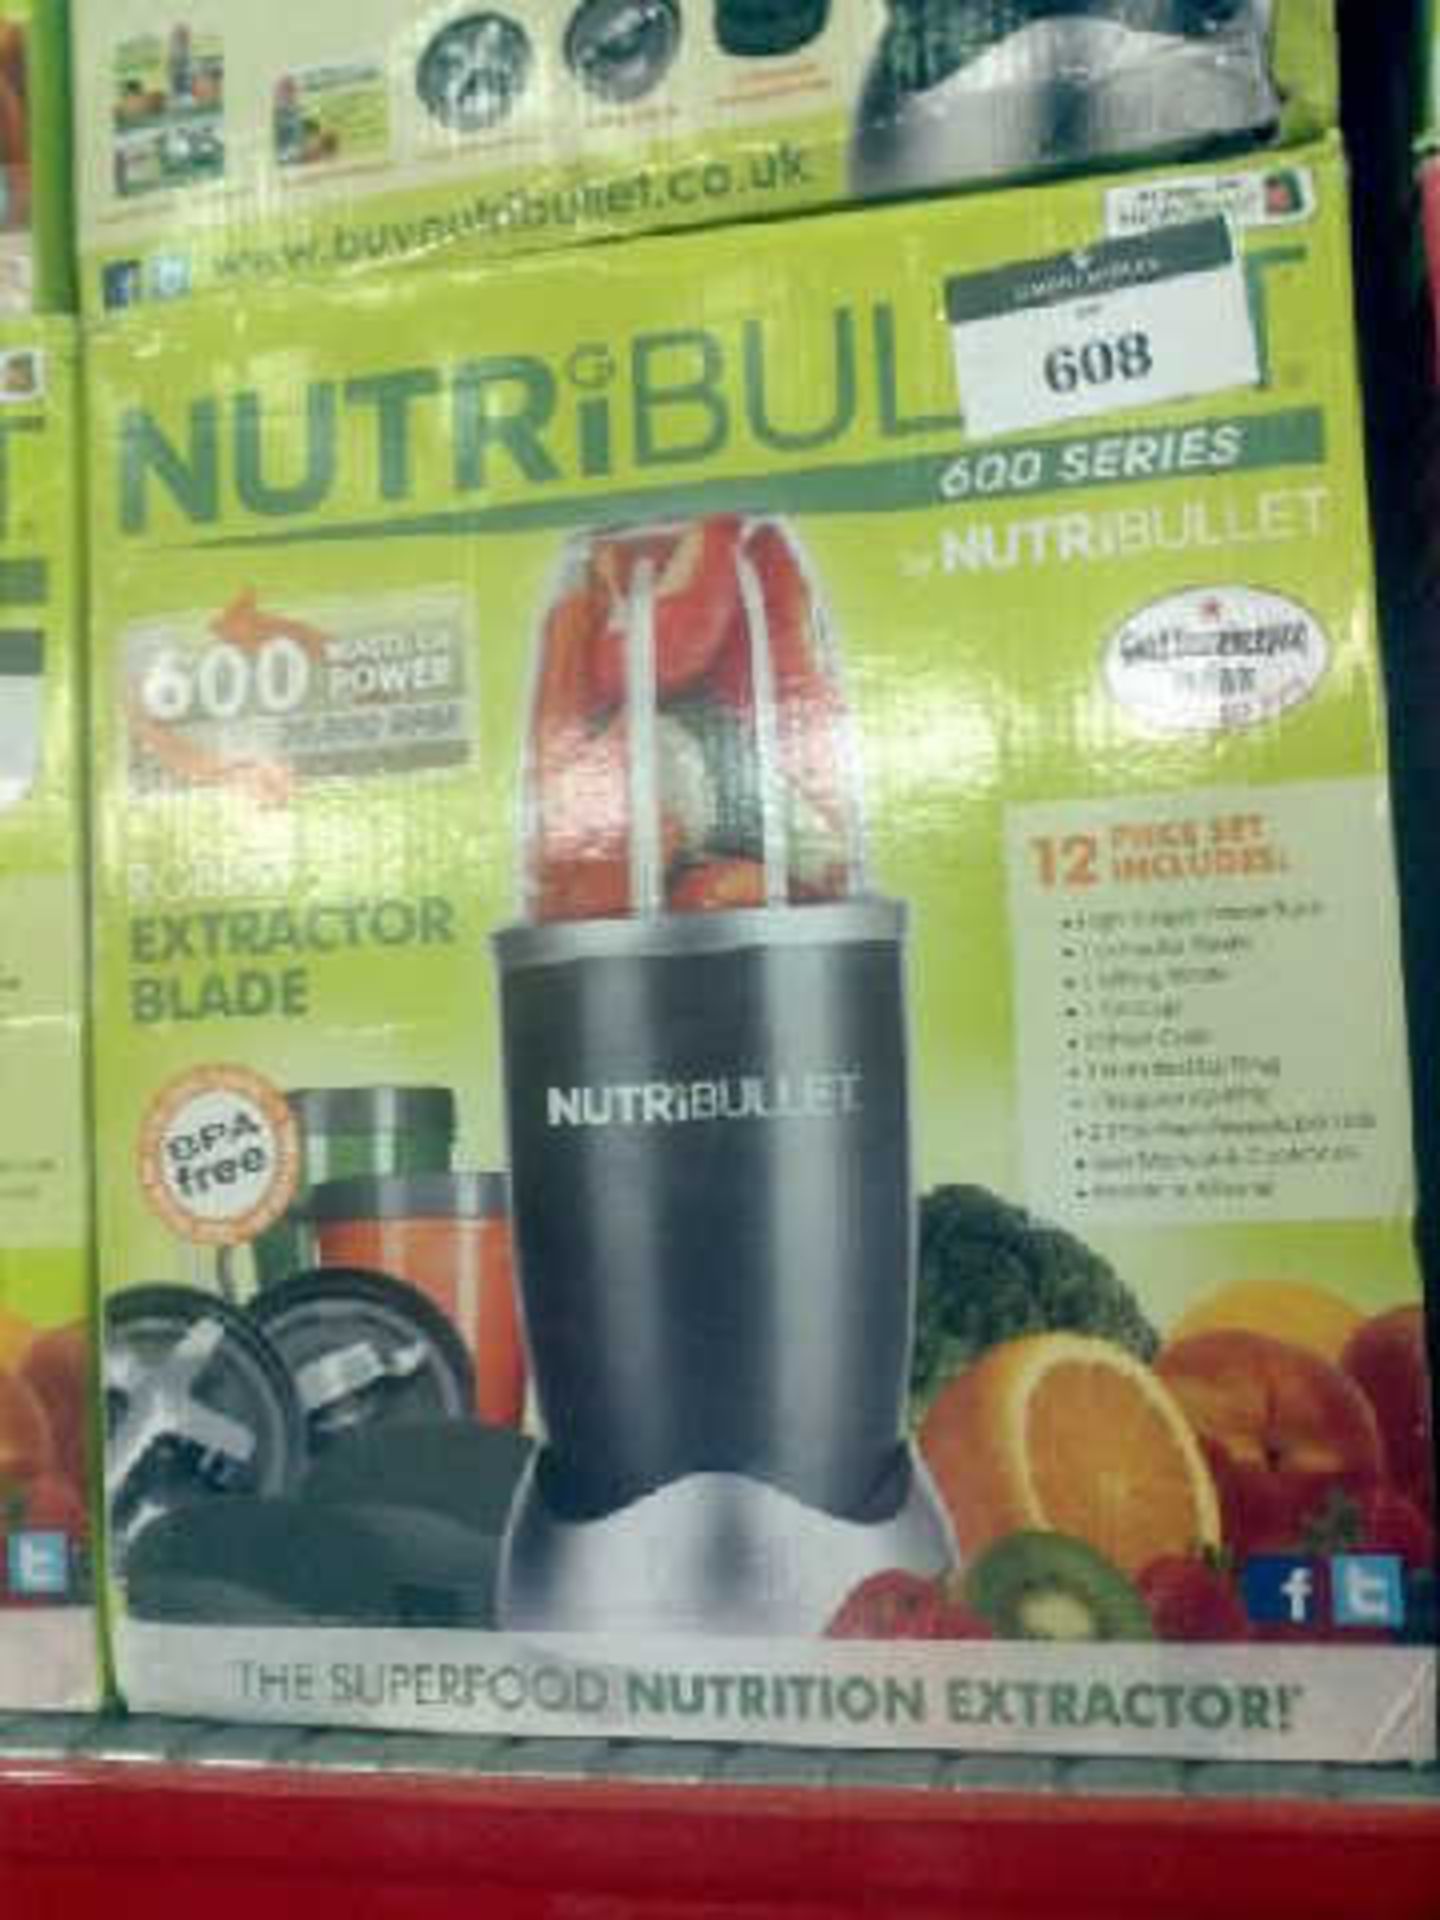 6 BOXED NUTRIBULLET 600 SERIES NUTRITION EXTRACTORS